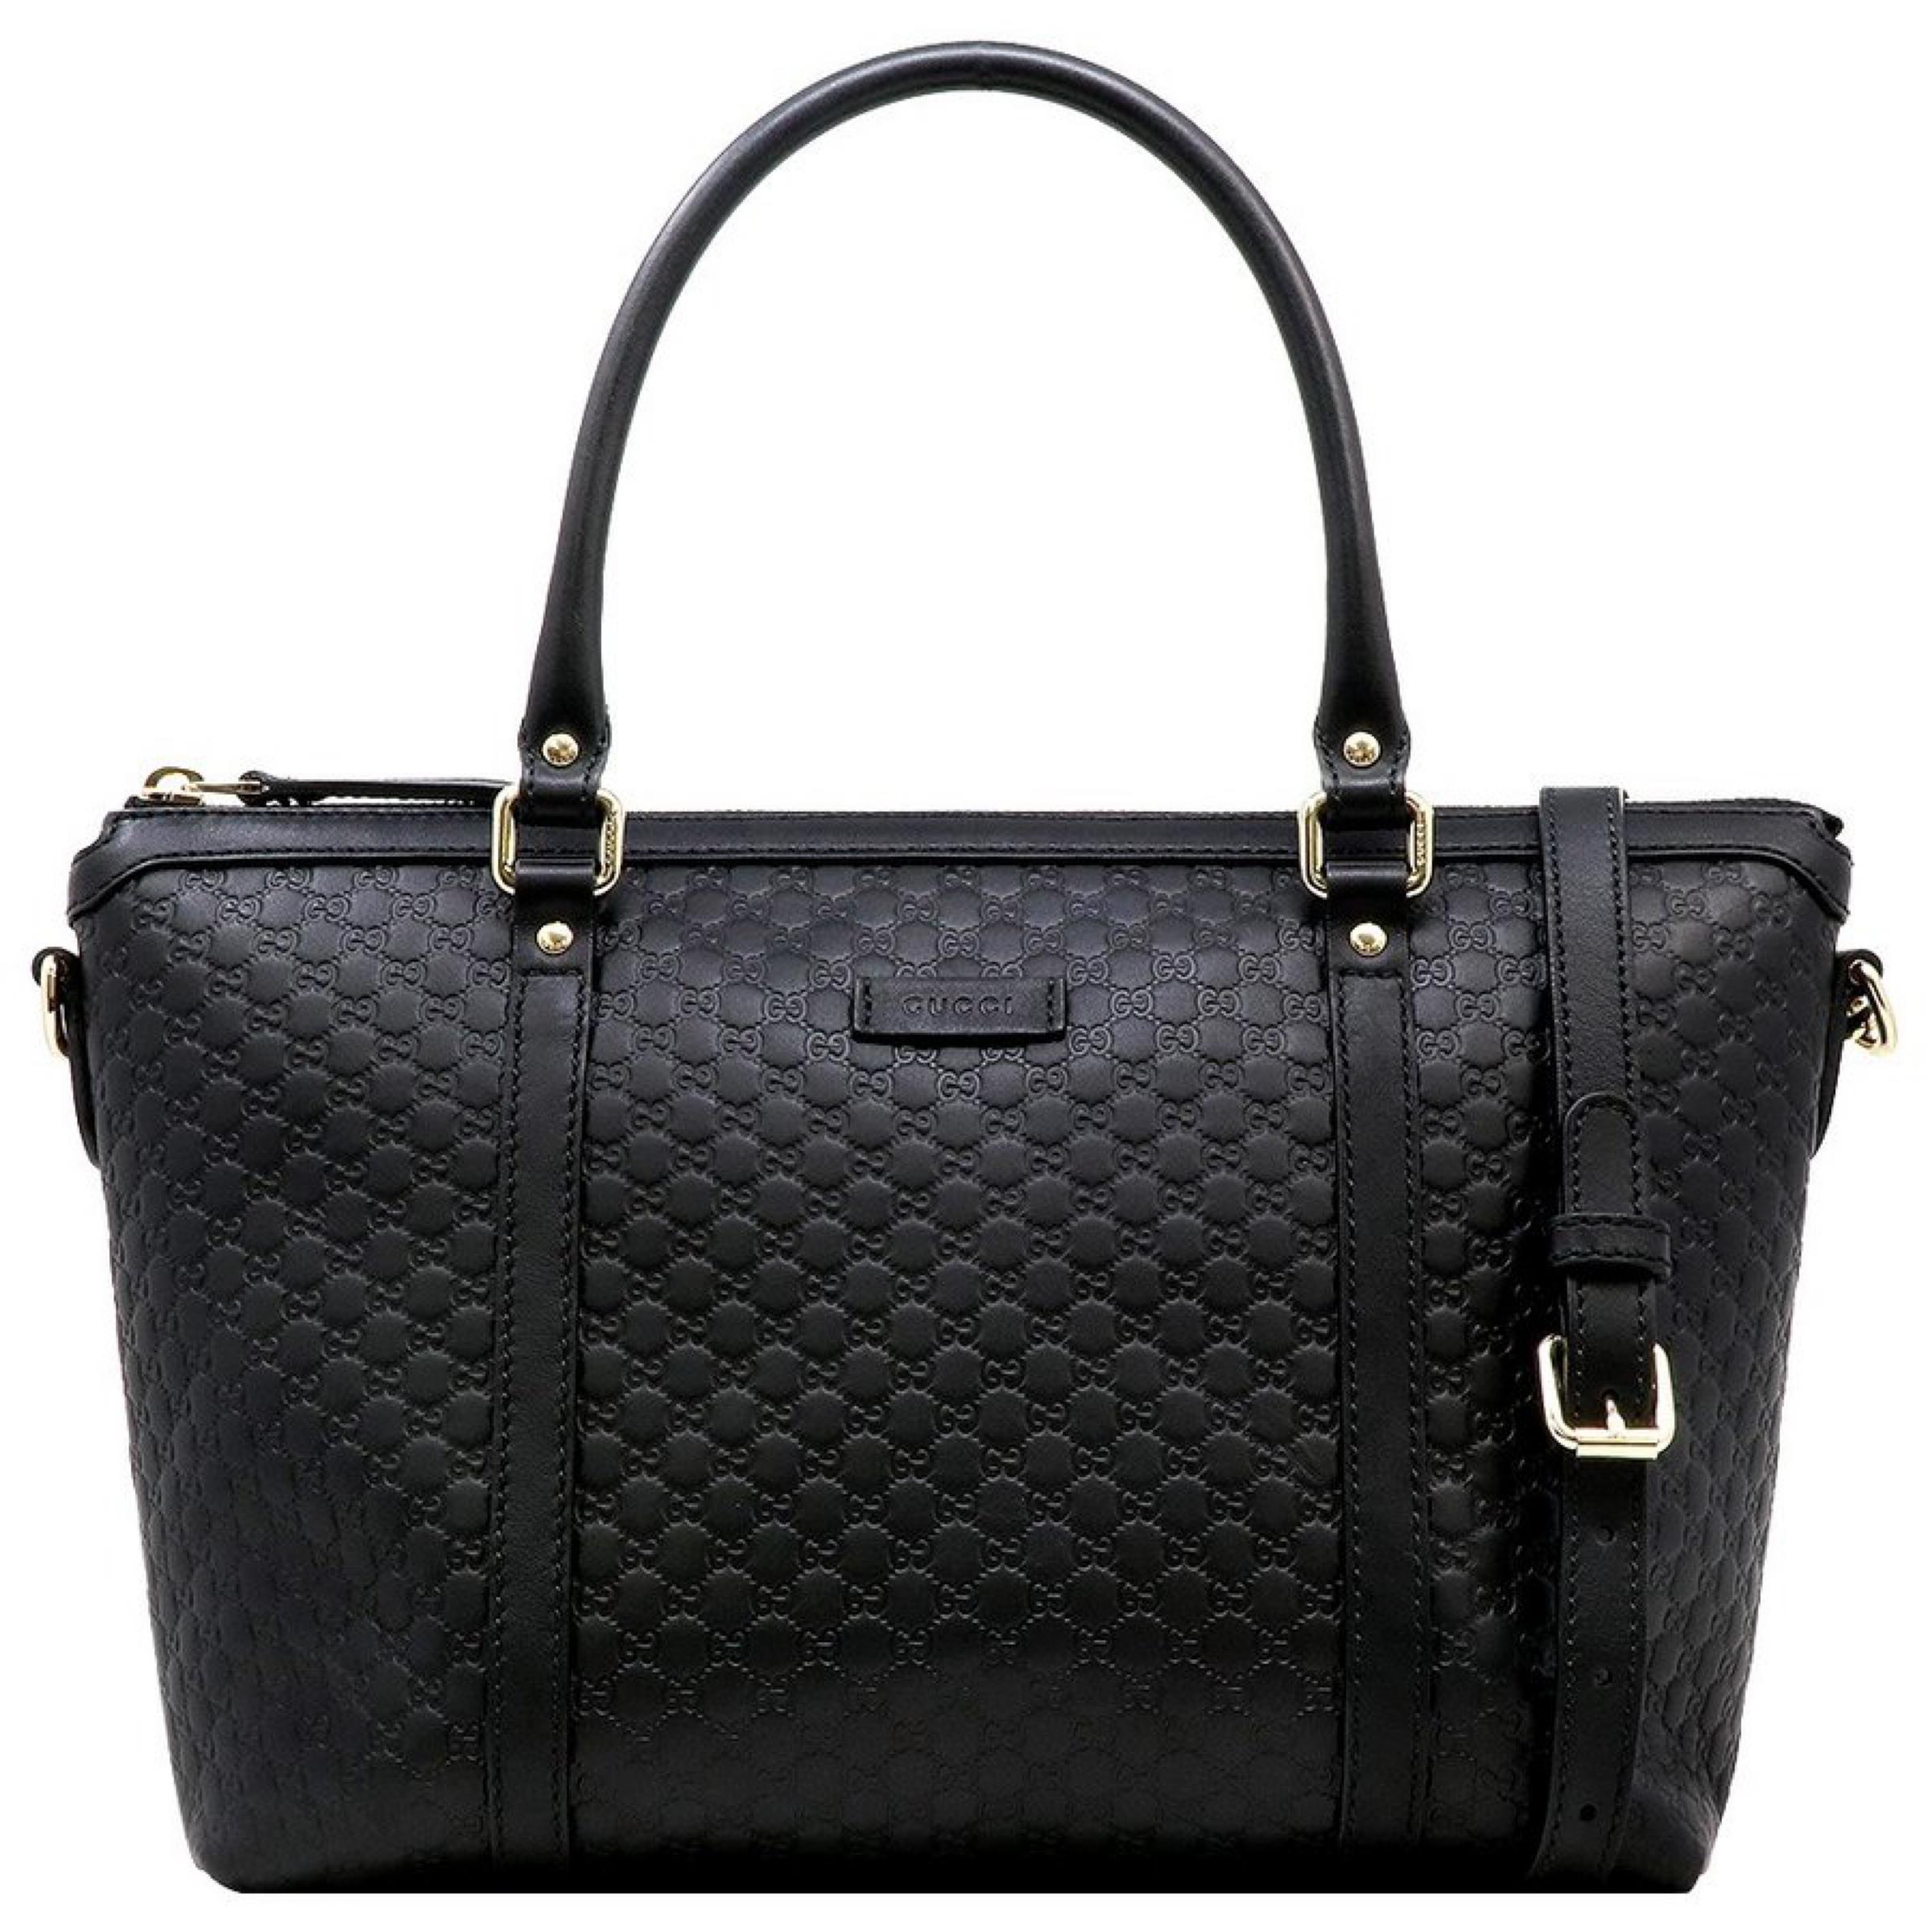 New Gucci Black Leather GG Micro Guccissima Large Tote Crossbody Shoulder Bag

Authenticity Guaranteed

DETAILS:
Made In Italy
Brand: Gucci
Gender: Women
Category: Handbag
Color: Black
Material: Leather
Top zip closure
Removable shoulder strap
1